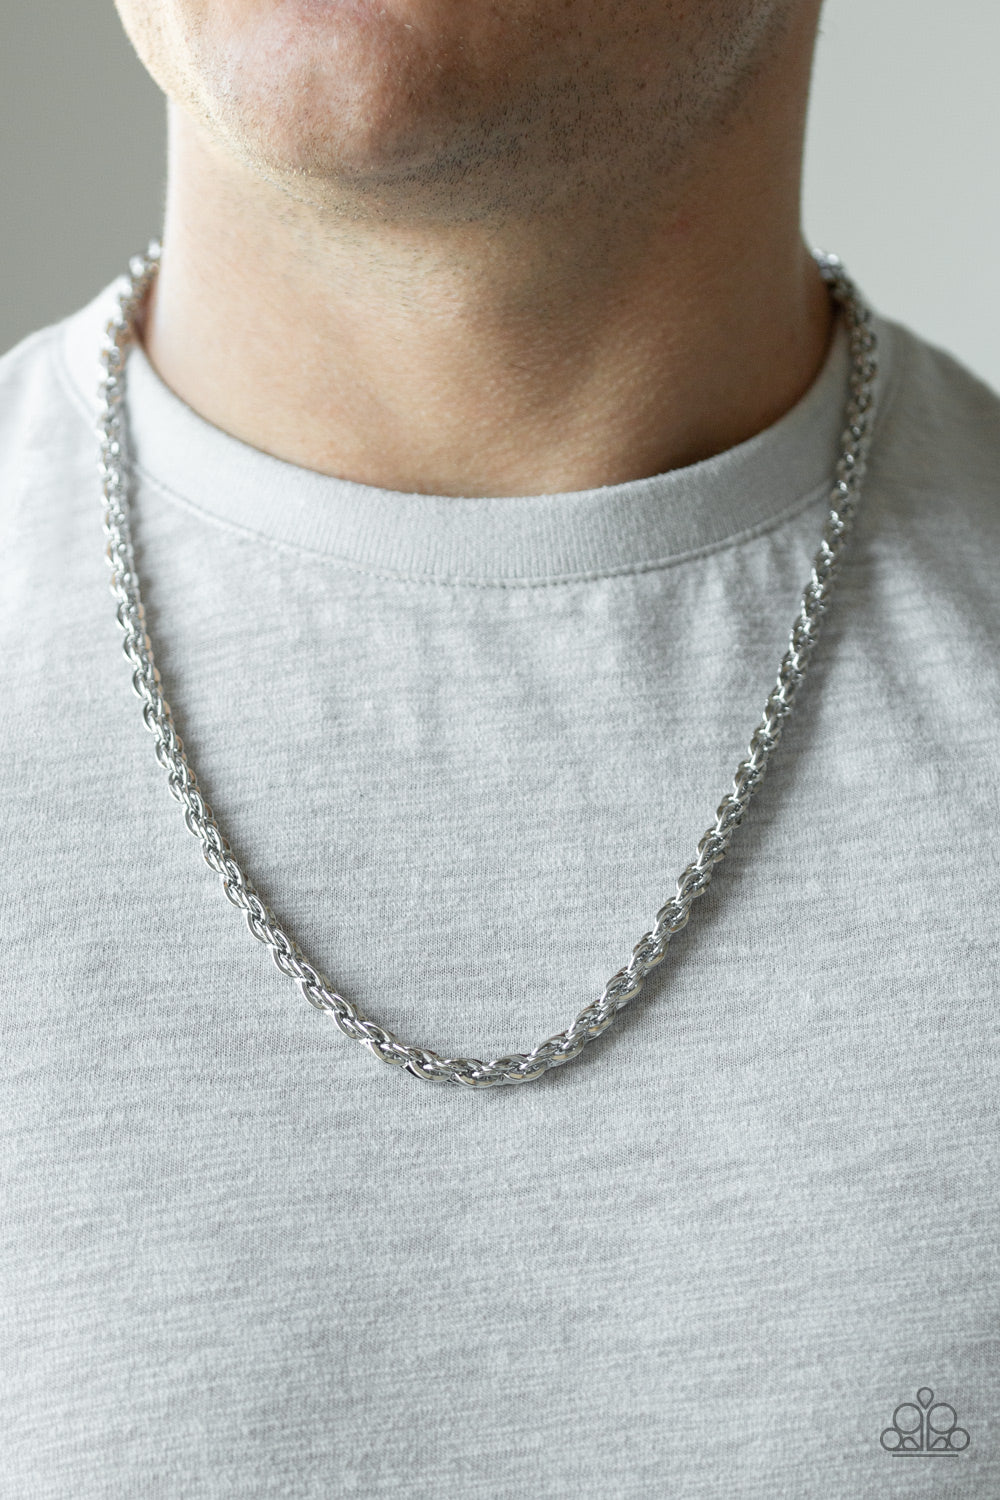 Instant Replay - Silver Necklace